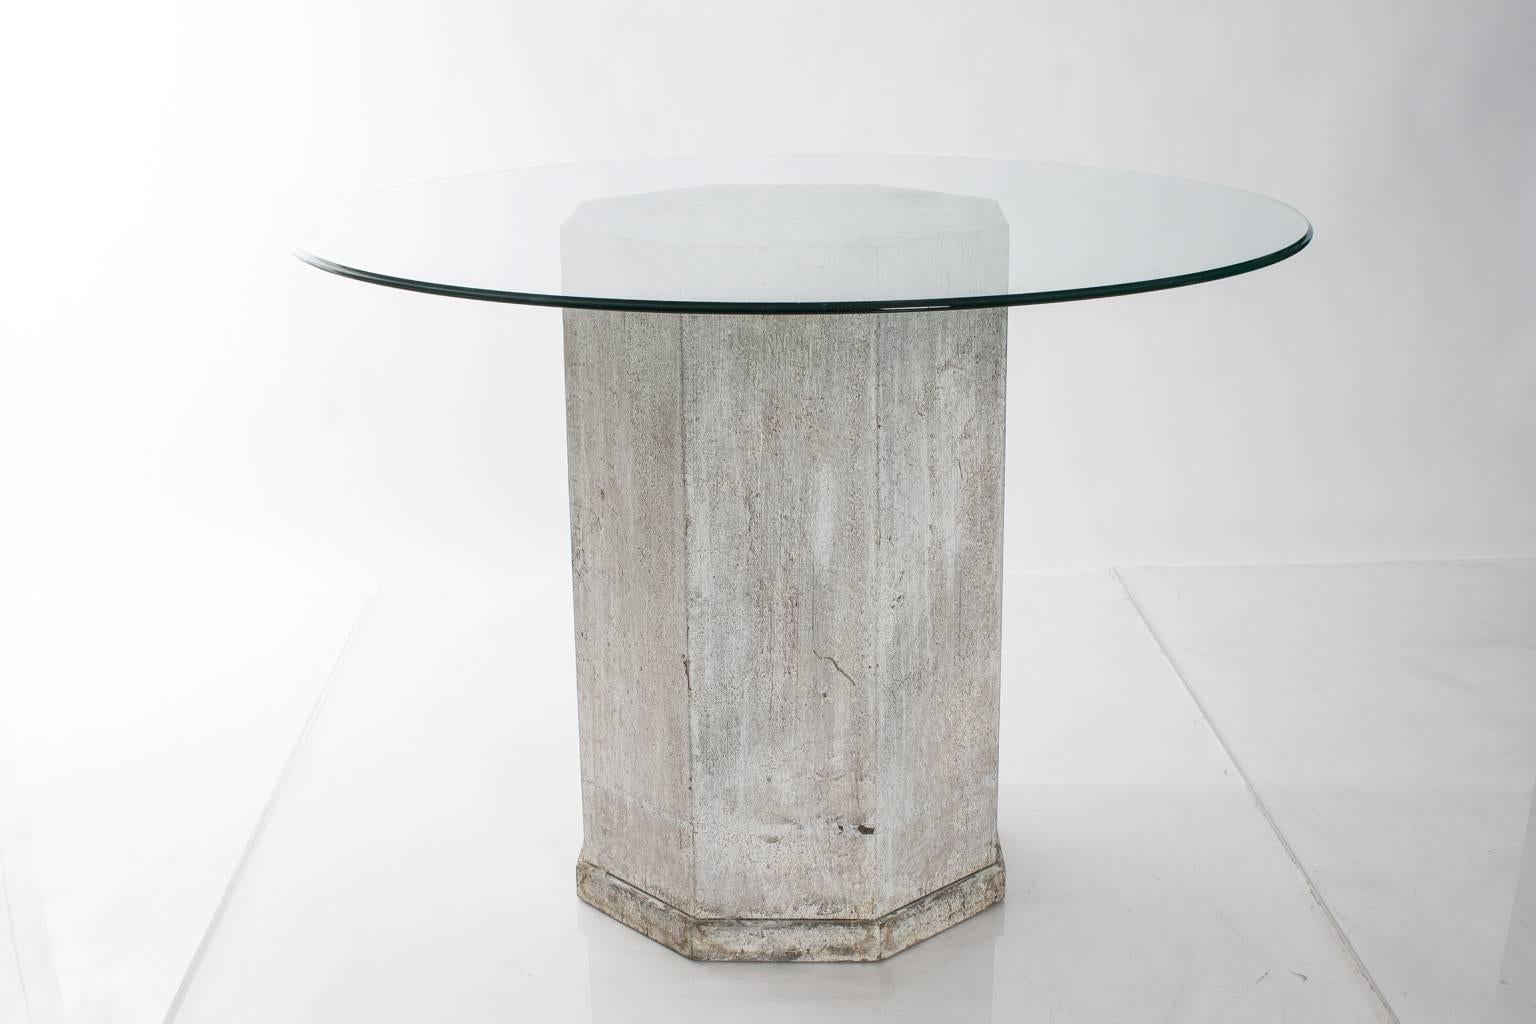 1930s wood pedestal base table with amazing patina. Can be used with or without glass.